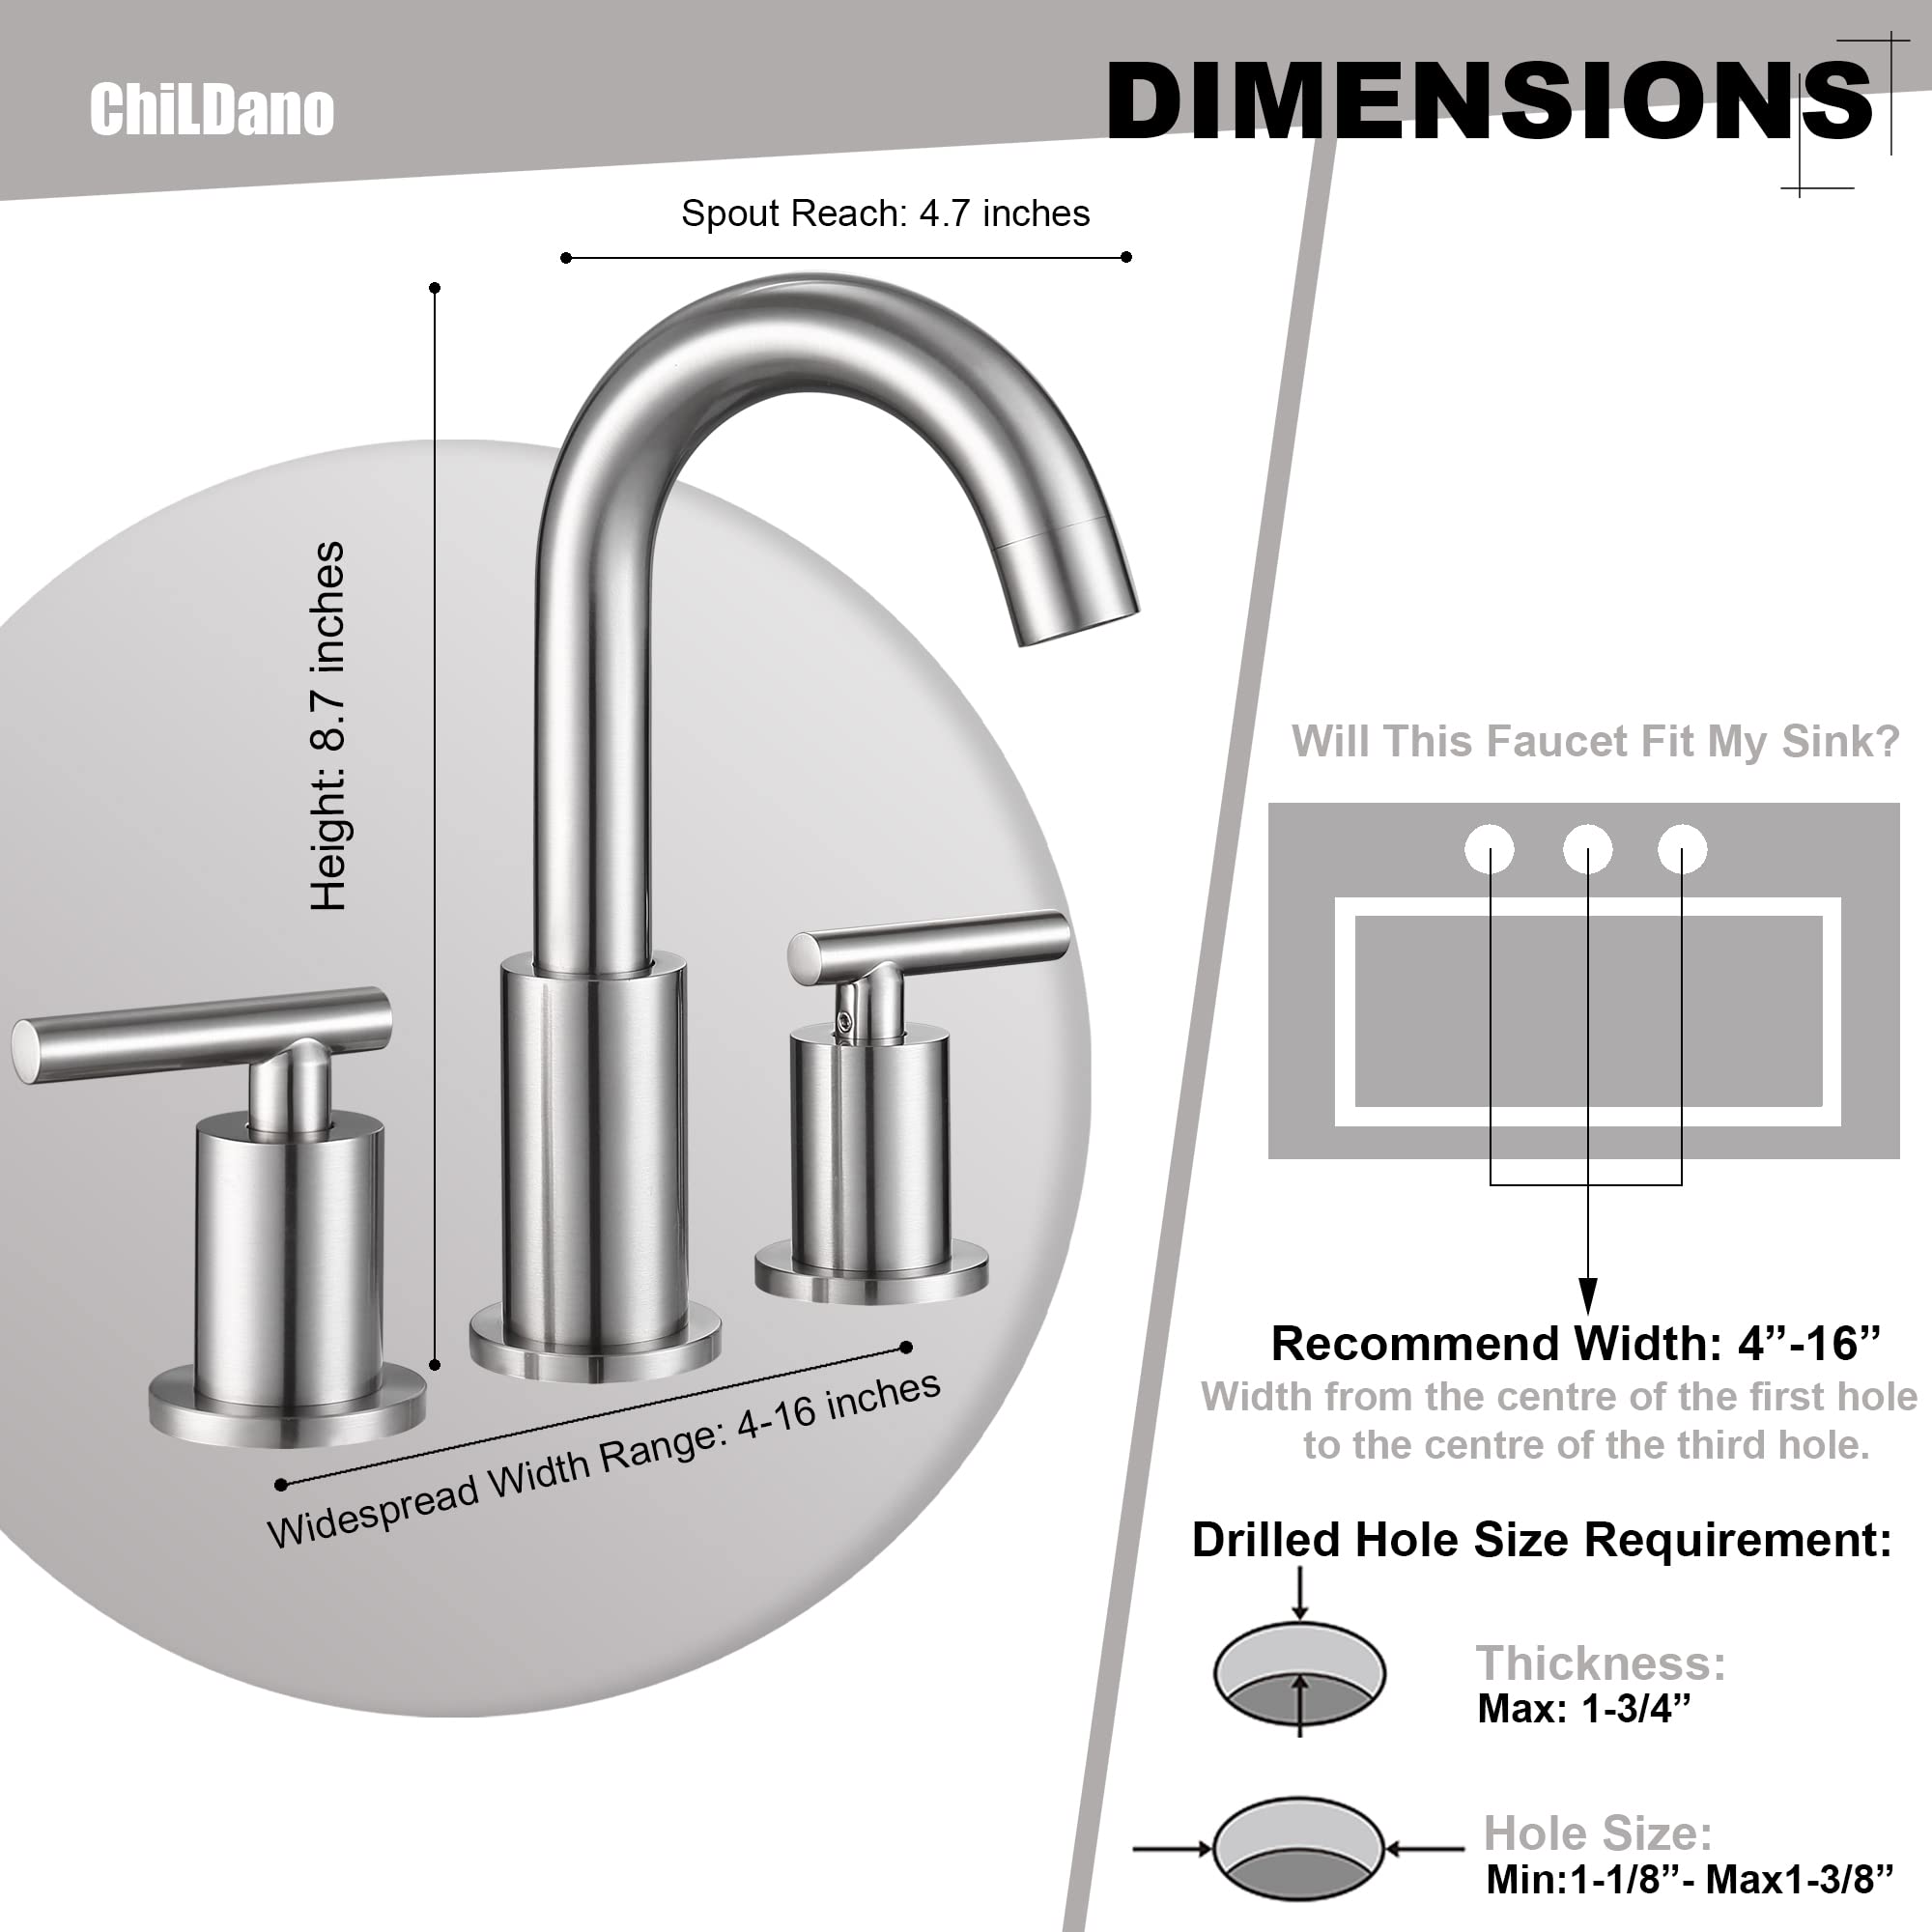 Widespread Bathroom Faucet with Sink Drain and Supply Hose, Brushed Nickel 3 Hole Faucet for Bathroom Sink, ChiLDano Satin Nickel 2-Handle Bathroom Faucet CH2183BN